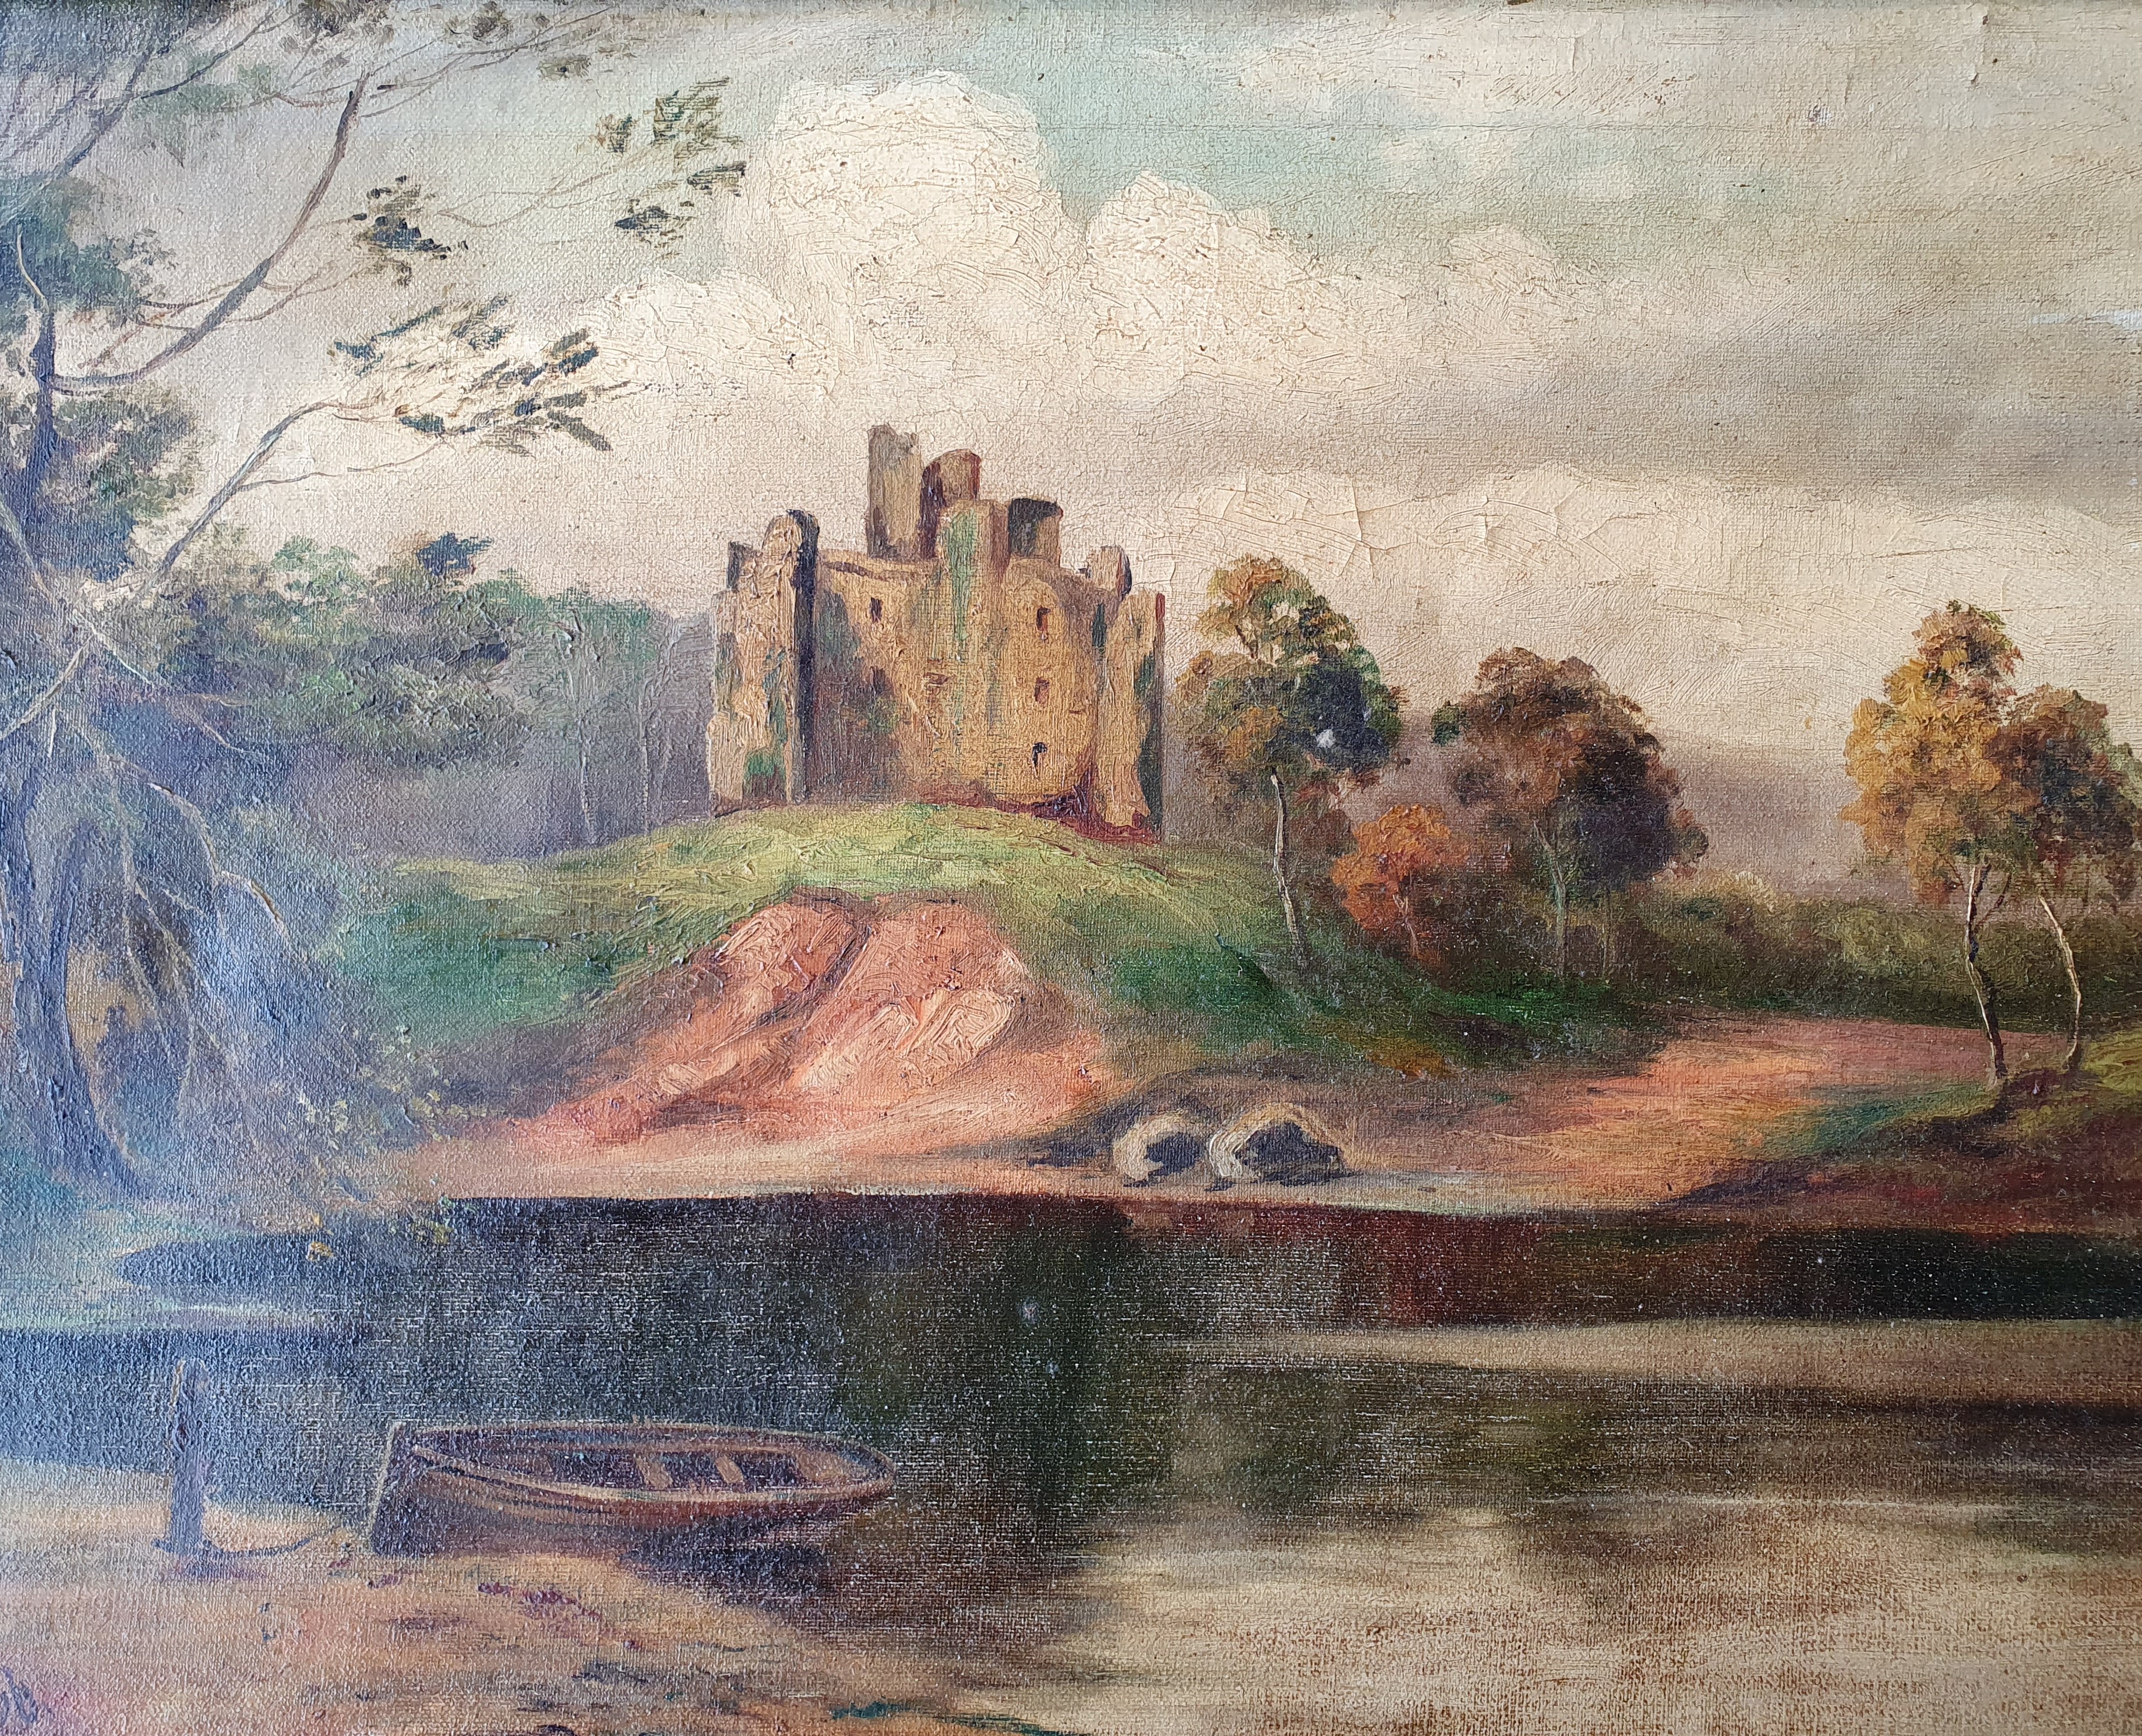 R.B. Wright, “Invergarry Castle”, 1906. Oil on canvas, signed and framed. Approx. 60cm x 39cm